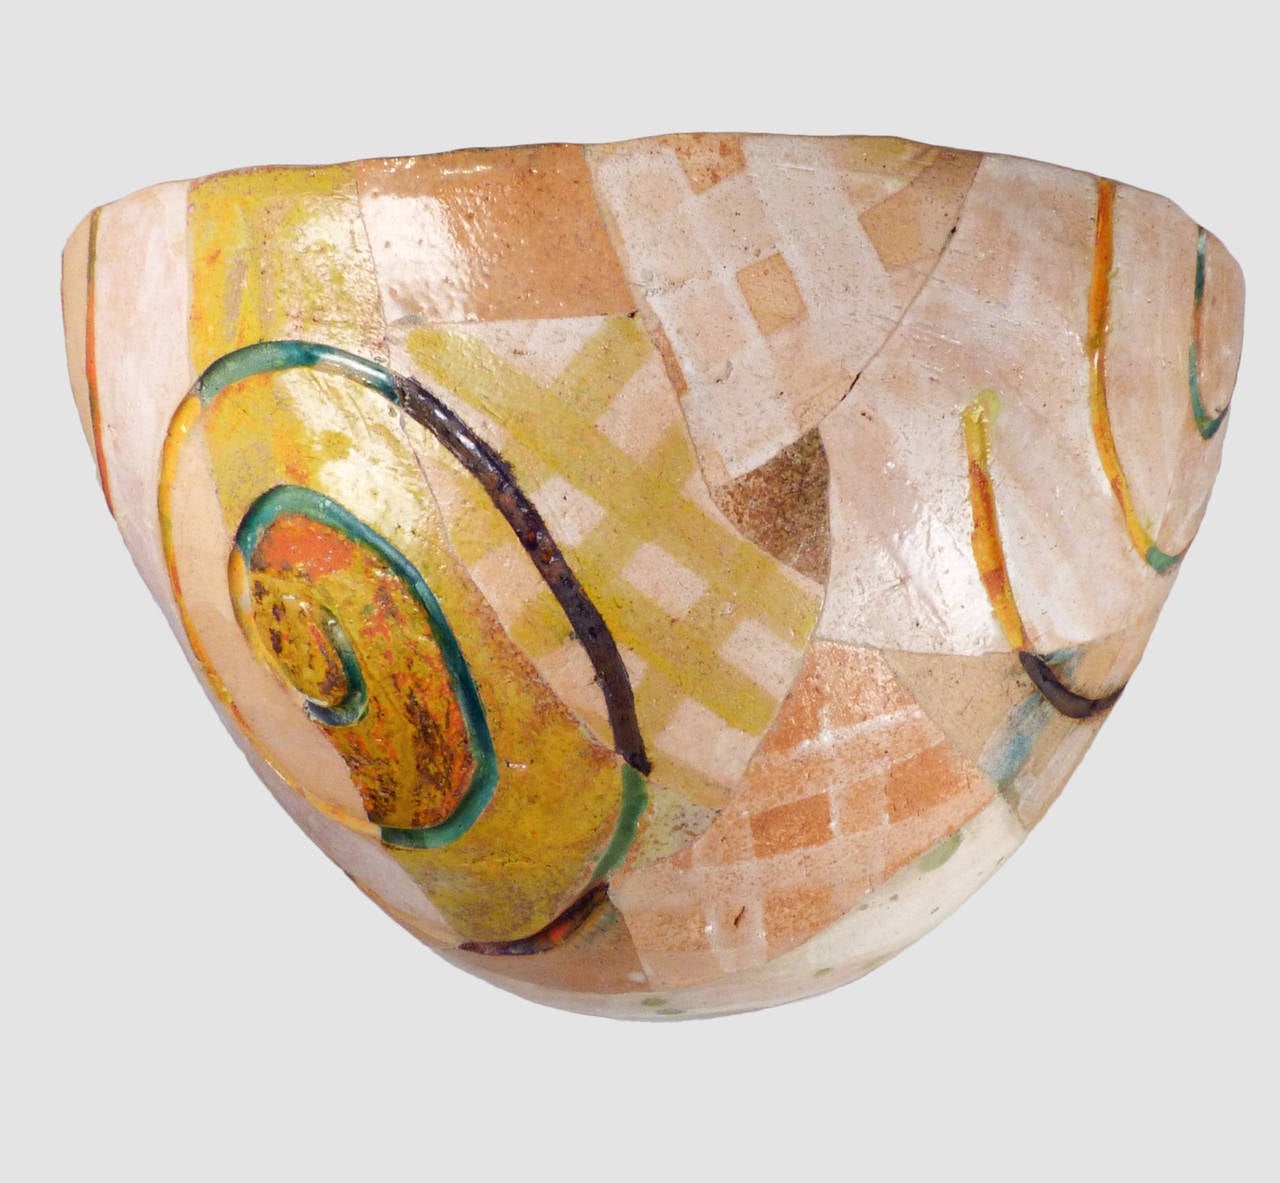 Pottery Sherd Bowl by innovative American ceramicist Rick Dillingham (1952-1994). Dillingham was a scholar of historic Pueblo pottery, published author and innovator of contemporary deconstructed pottery styles. While working as a restorer of